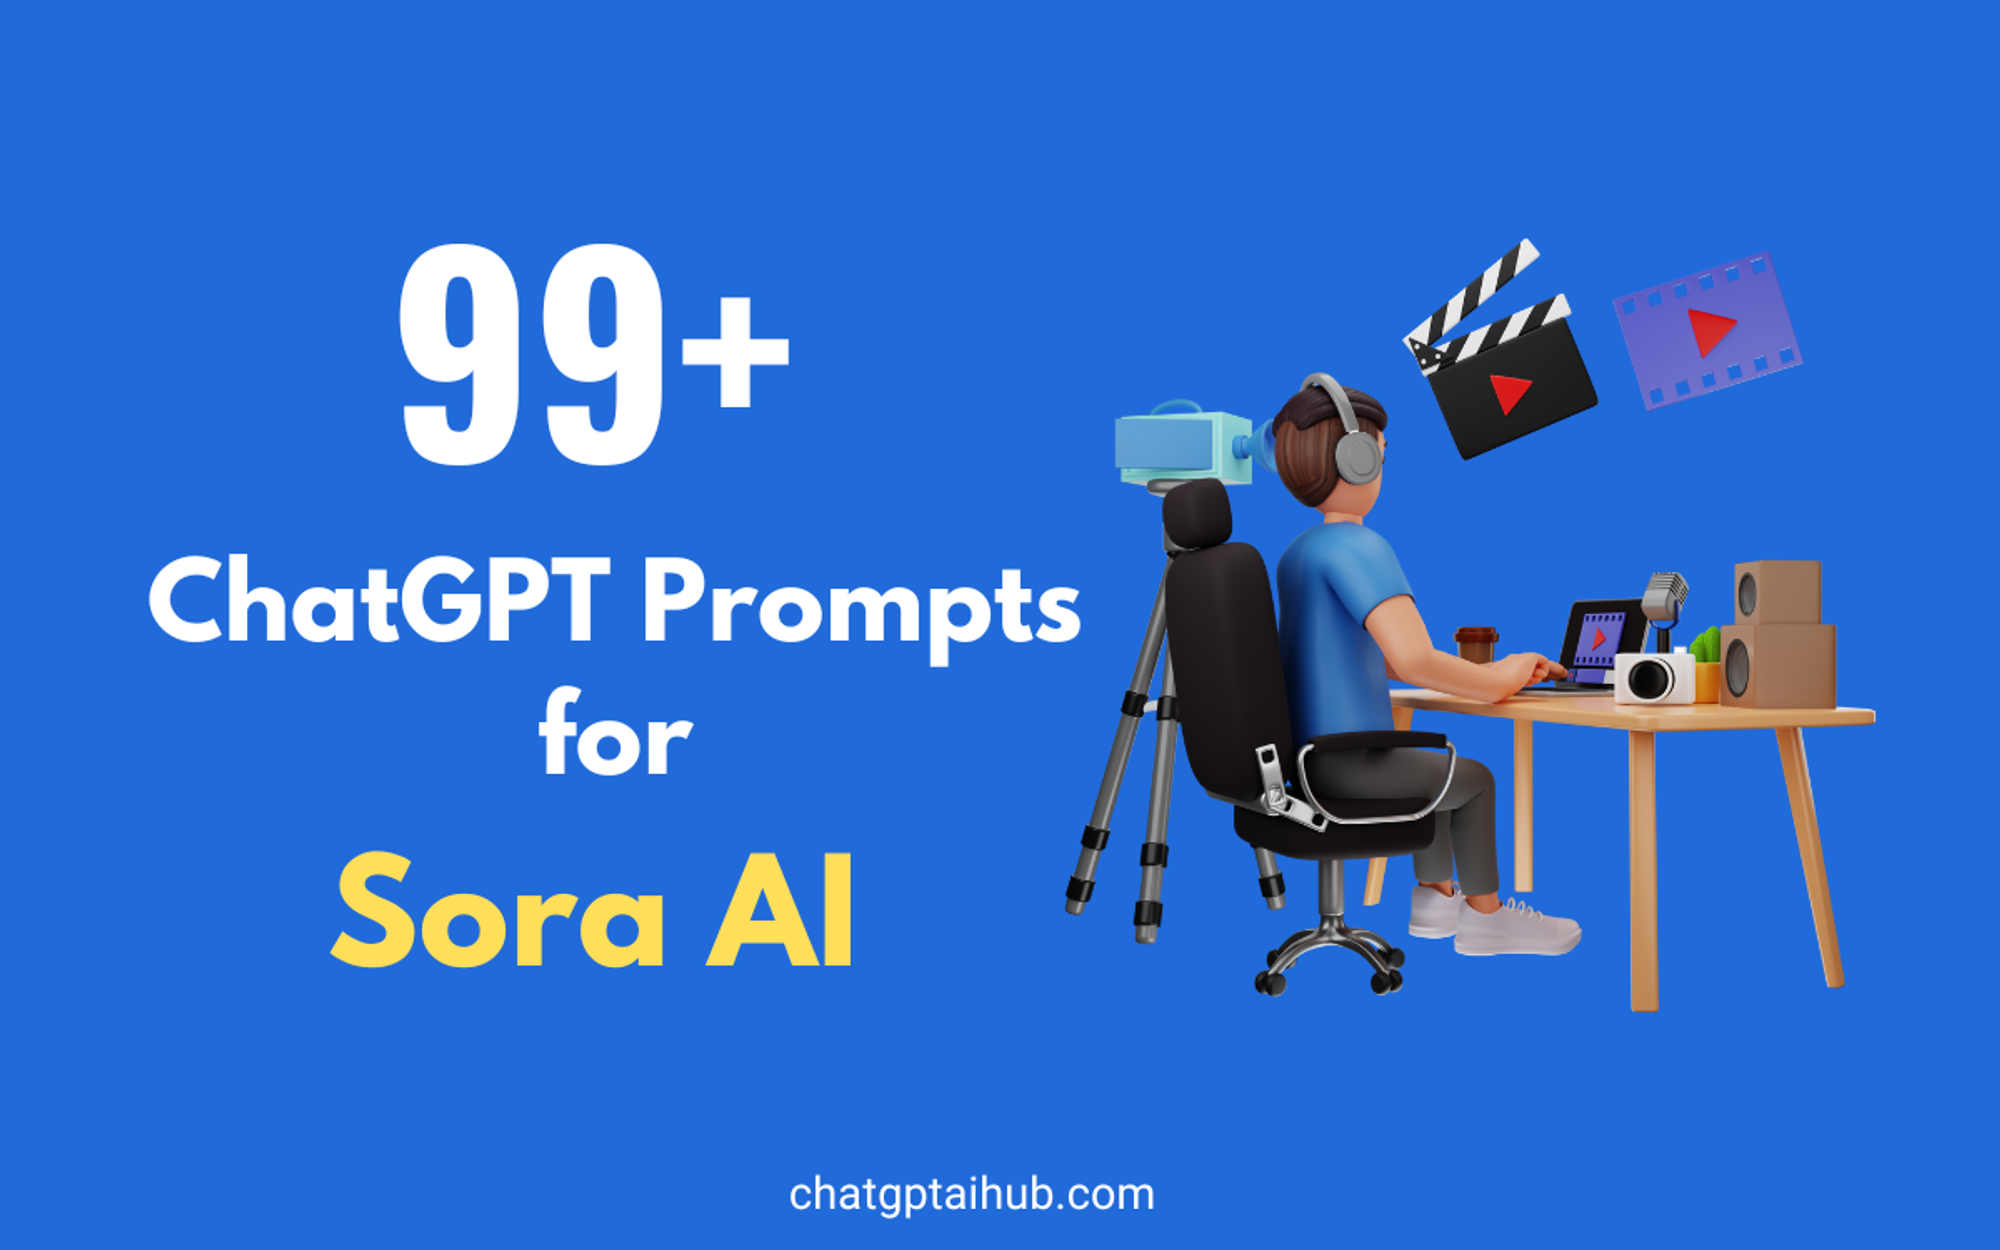 147+ Creative ChatGPT Prompts for Sora AI to Spark Your Imagination - Chat GPT AI Hub